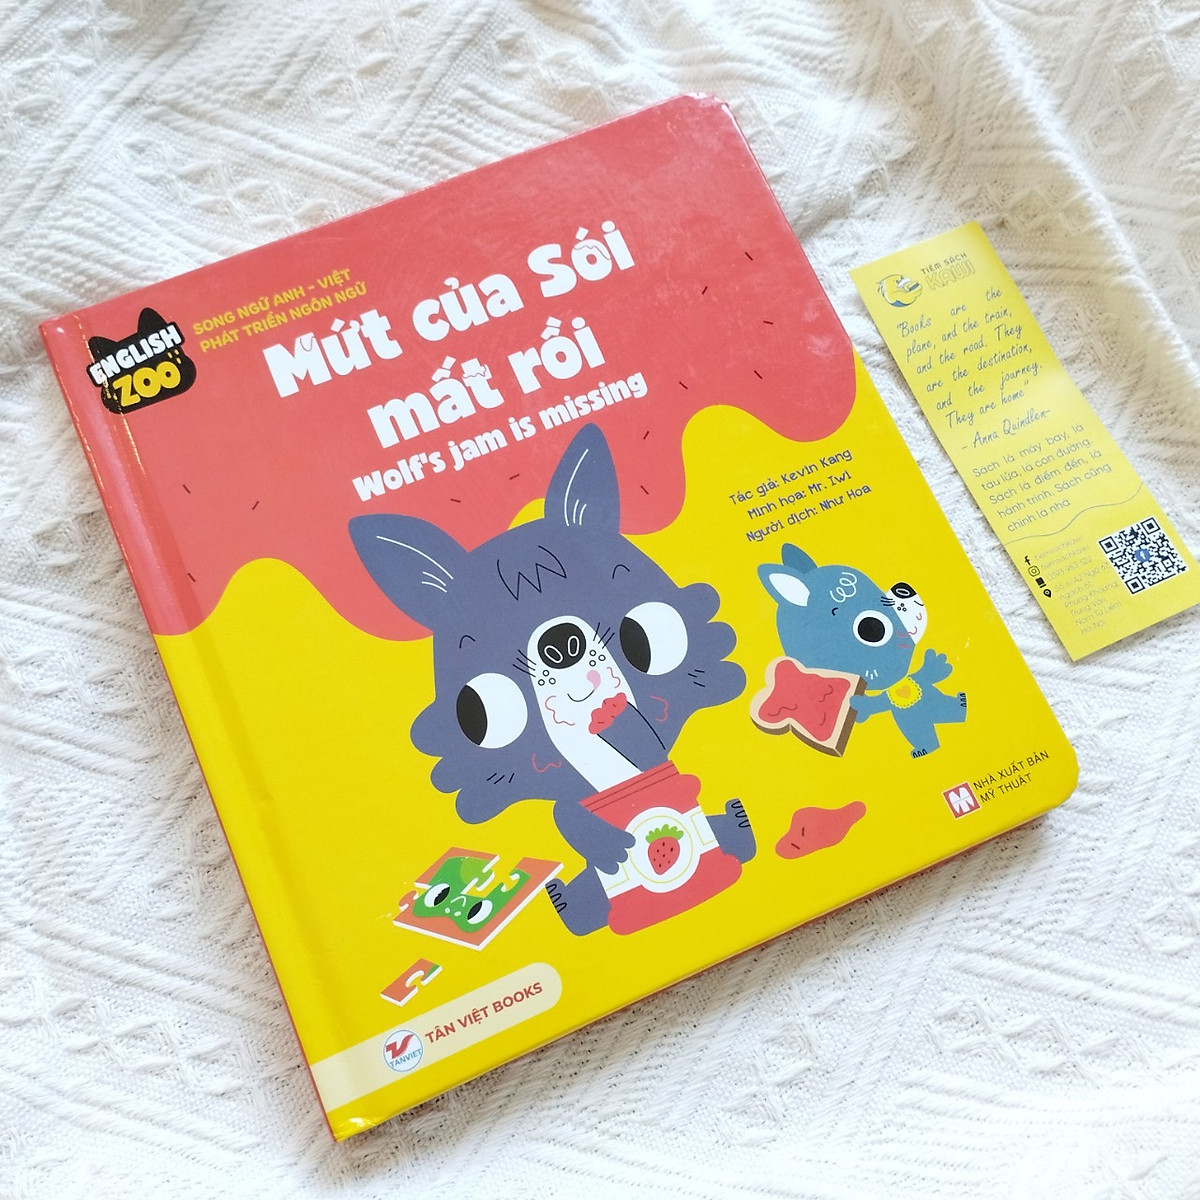 English Zoo - Mứt Của Sói Mất Rồi – Wolf’s jam is missing - Song Ngữ Anh -Việt